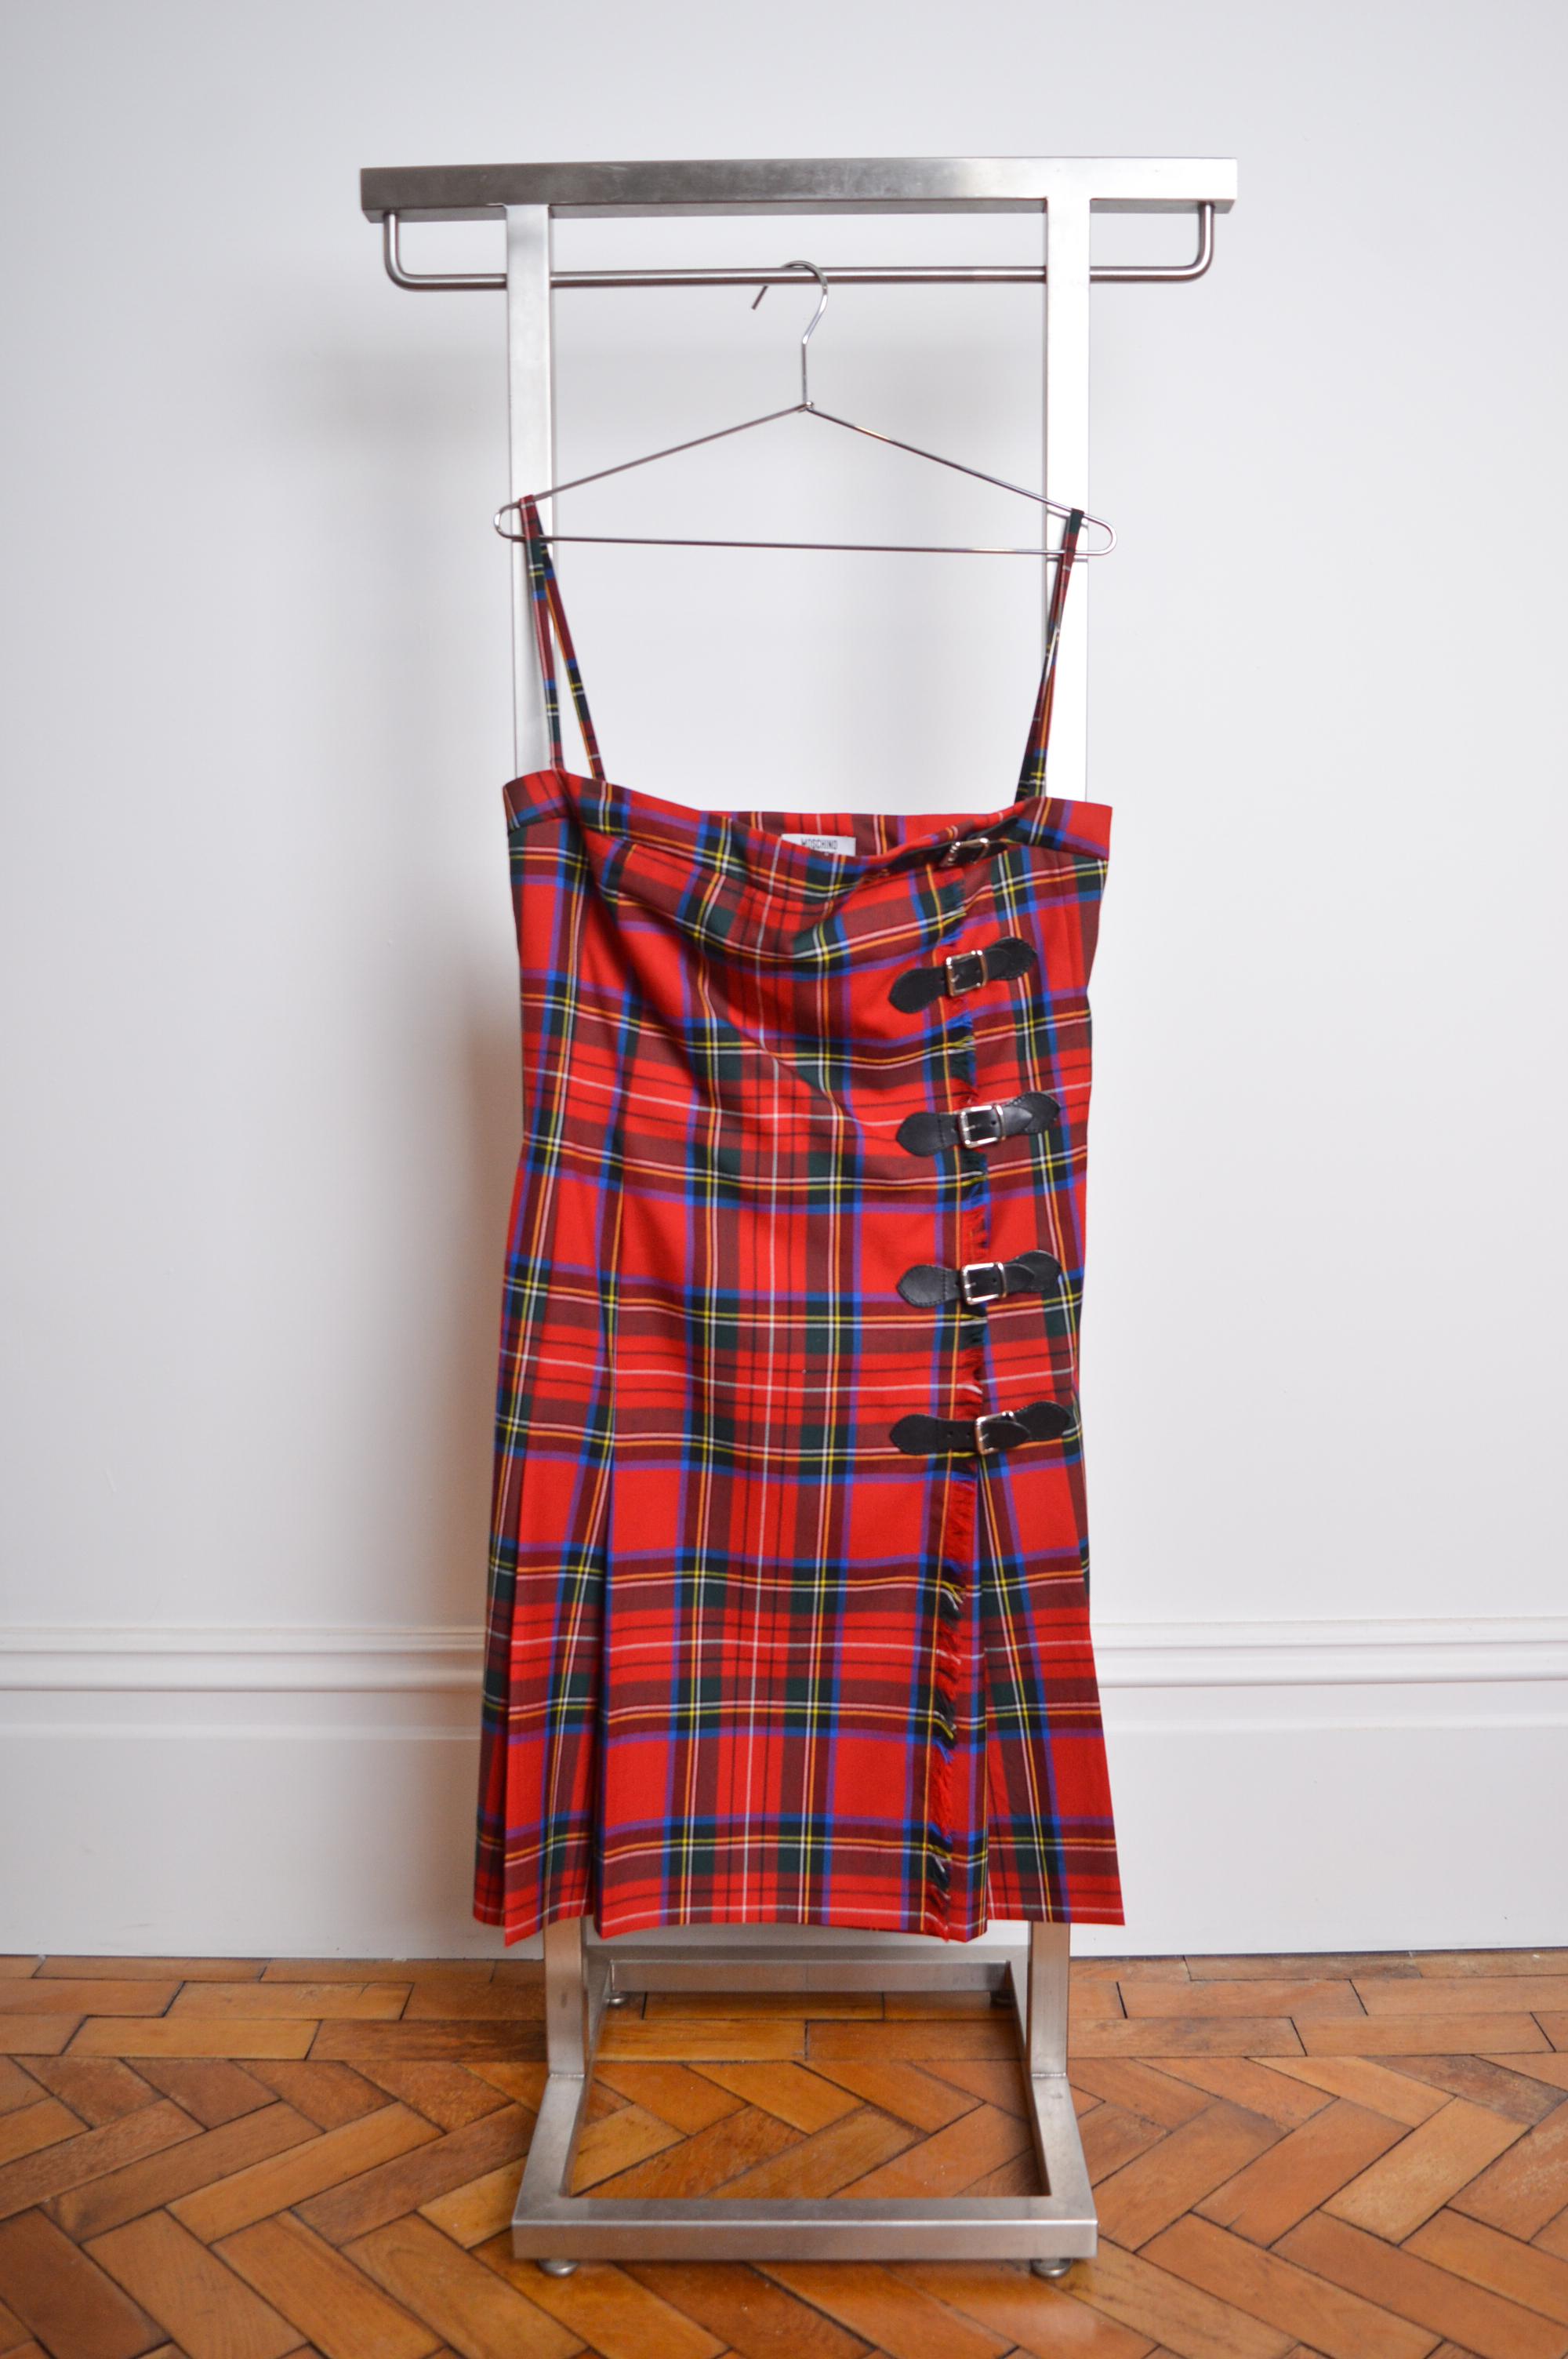 Fun Vintage 2000's MOSCHINO 'Cheap & Chic' Label strapless avant guard Kilt Dress.

This beautiful, Bustier style pleated Kilt Dress is crafted from Red Tartan Wool with Black leather buckle details and inbuilt interior boning construction aswell as